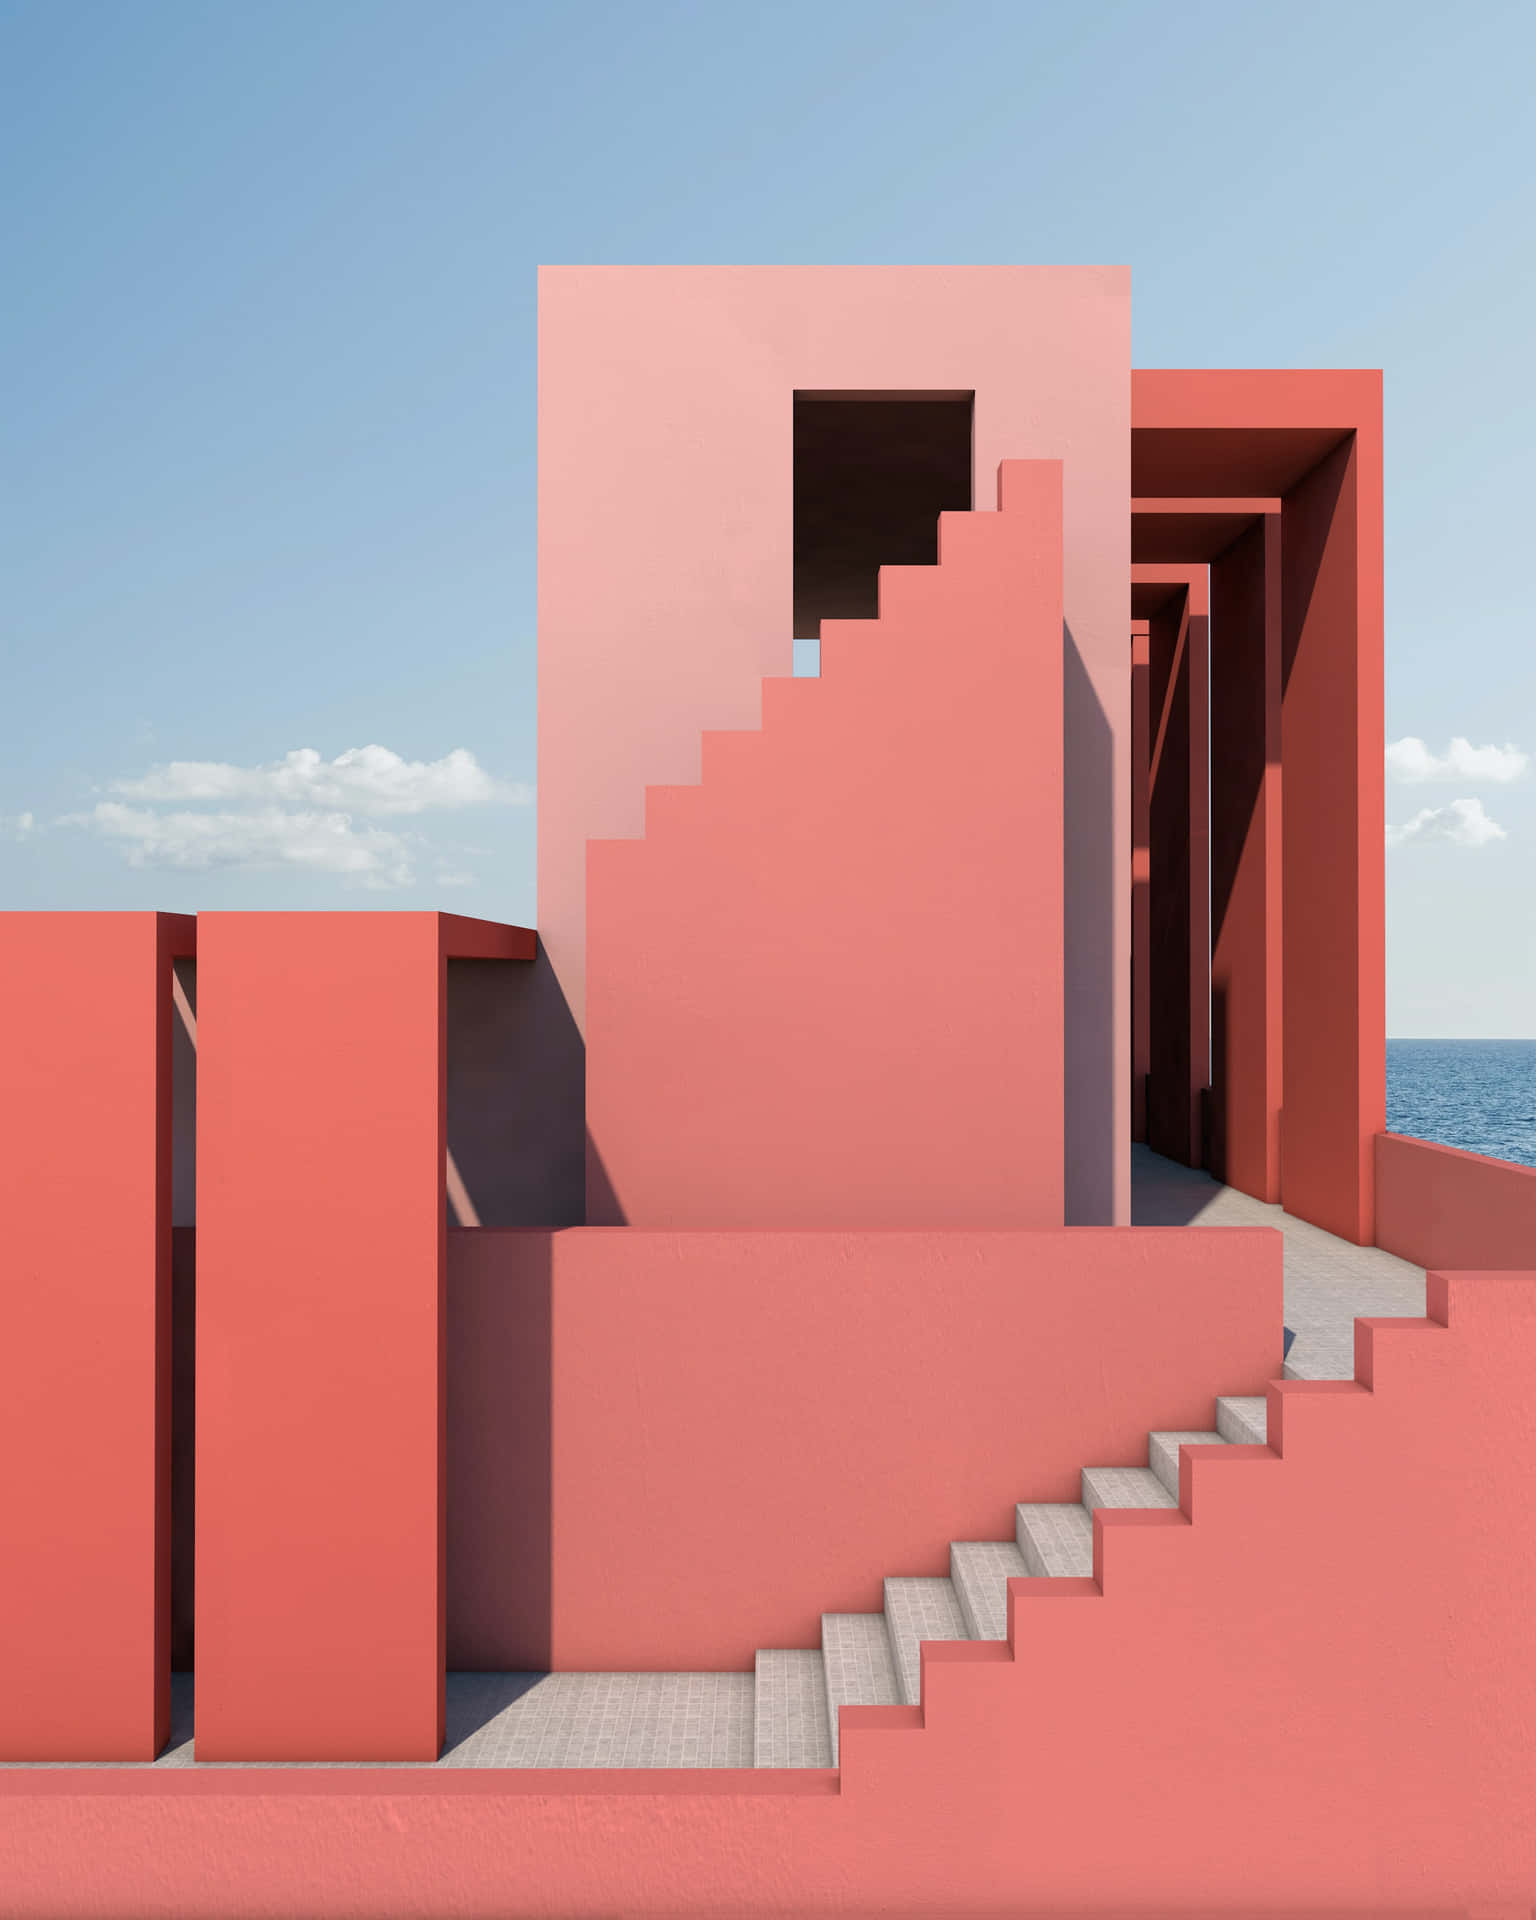 A Pink Building With Stairs Leading To The Ocean